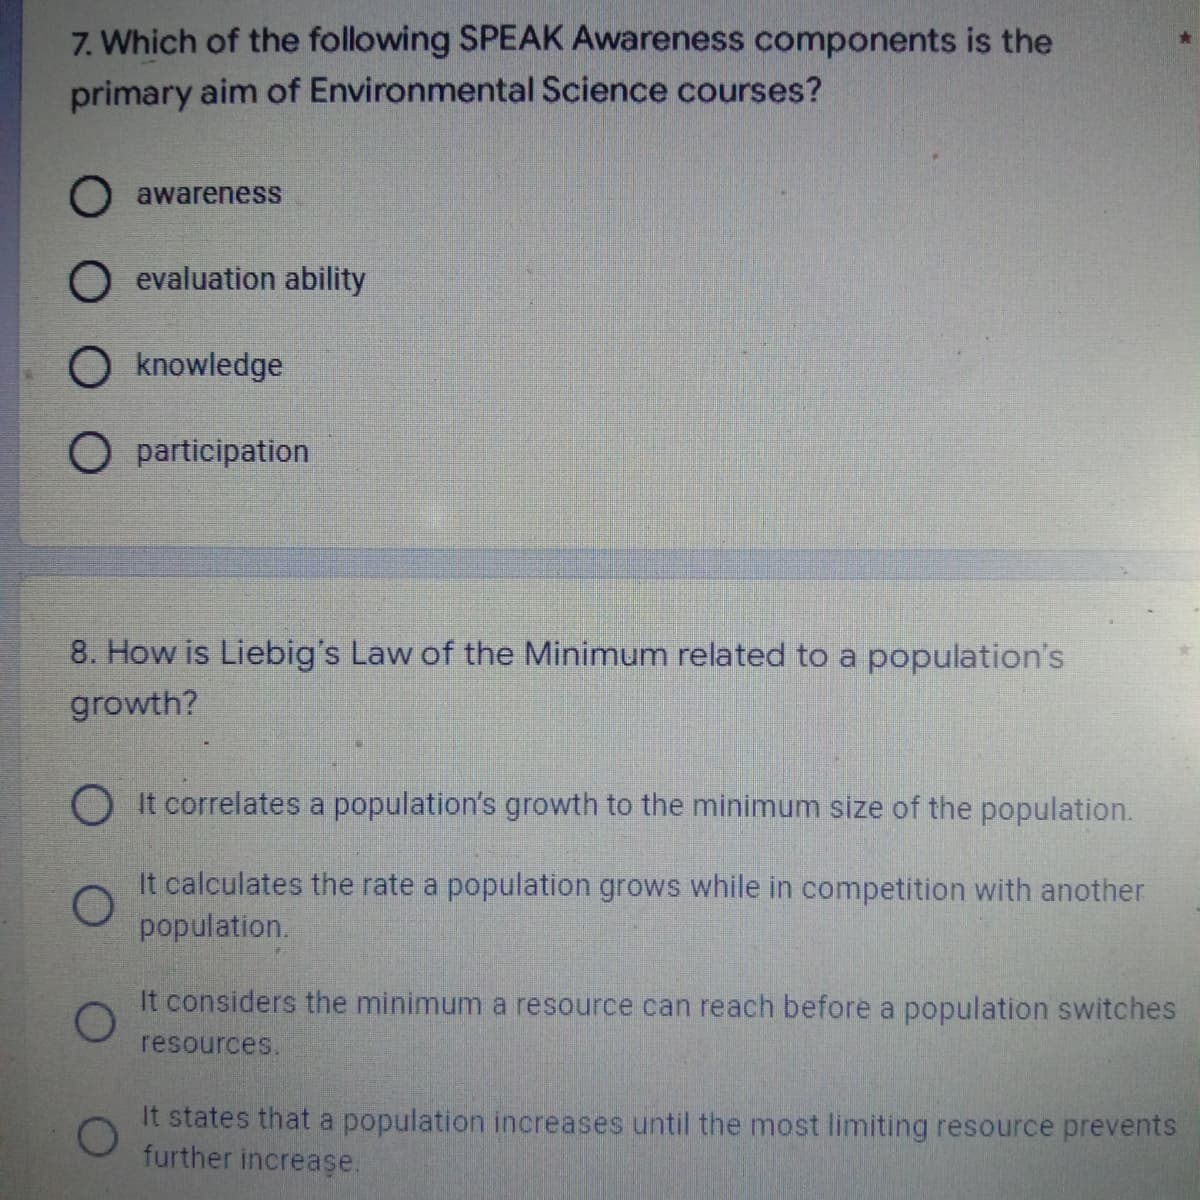 7. Which of the following SPEAK Awareness components is the
primary aim of Environmental Science courses?
O awareness
O evaluation ability
O knowledge
O participation
8. How is Liebig's Law of the Minimum related to a population's
growth?
OIt correlates a population's growth to the minimum size of the population.
O
It calculates the rate a population grows while in competition with another
population.
It considers the minimum a resource can reach before a population switches
O
resources.
It states that a population increases until the most limiting resource prevents
further increase.